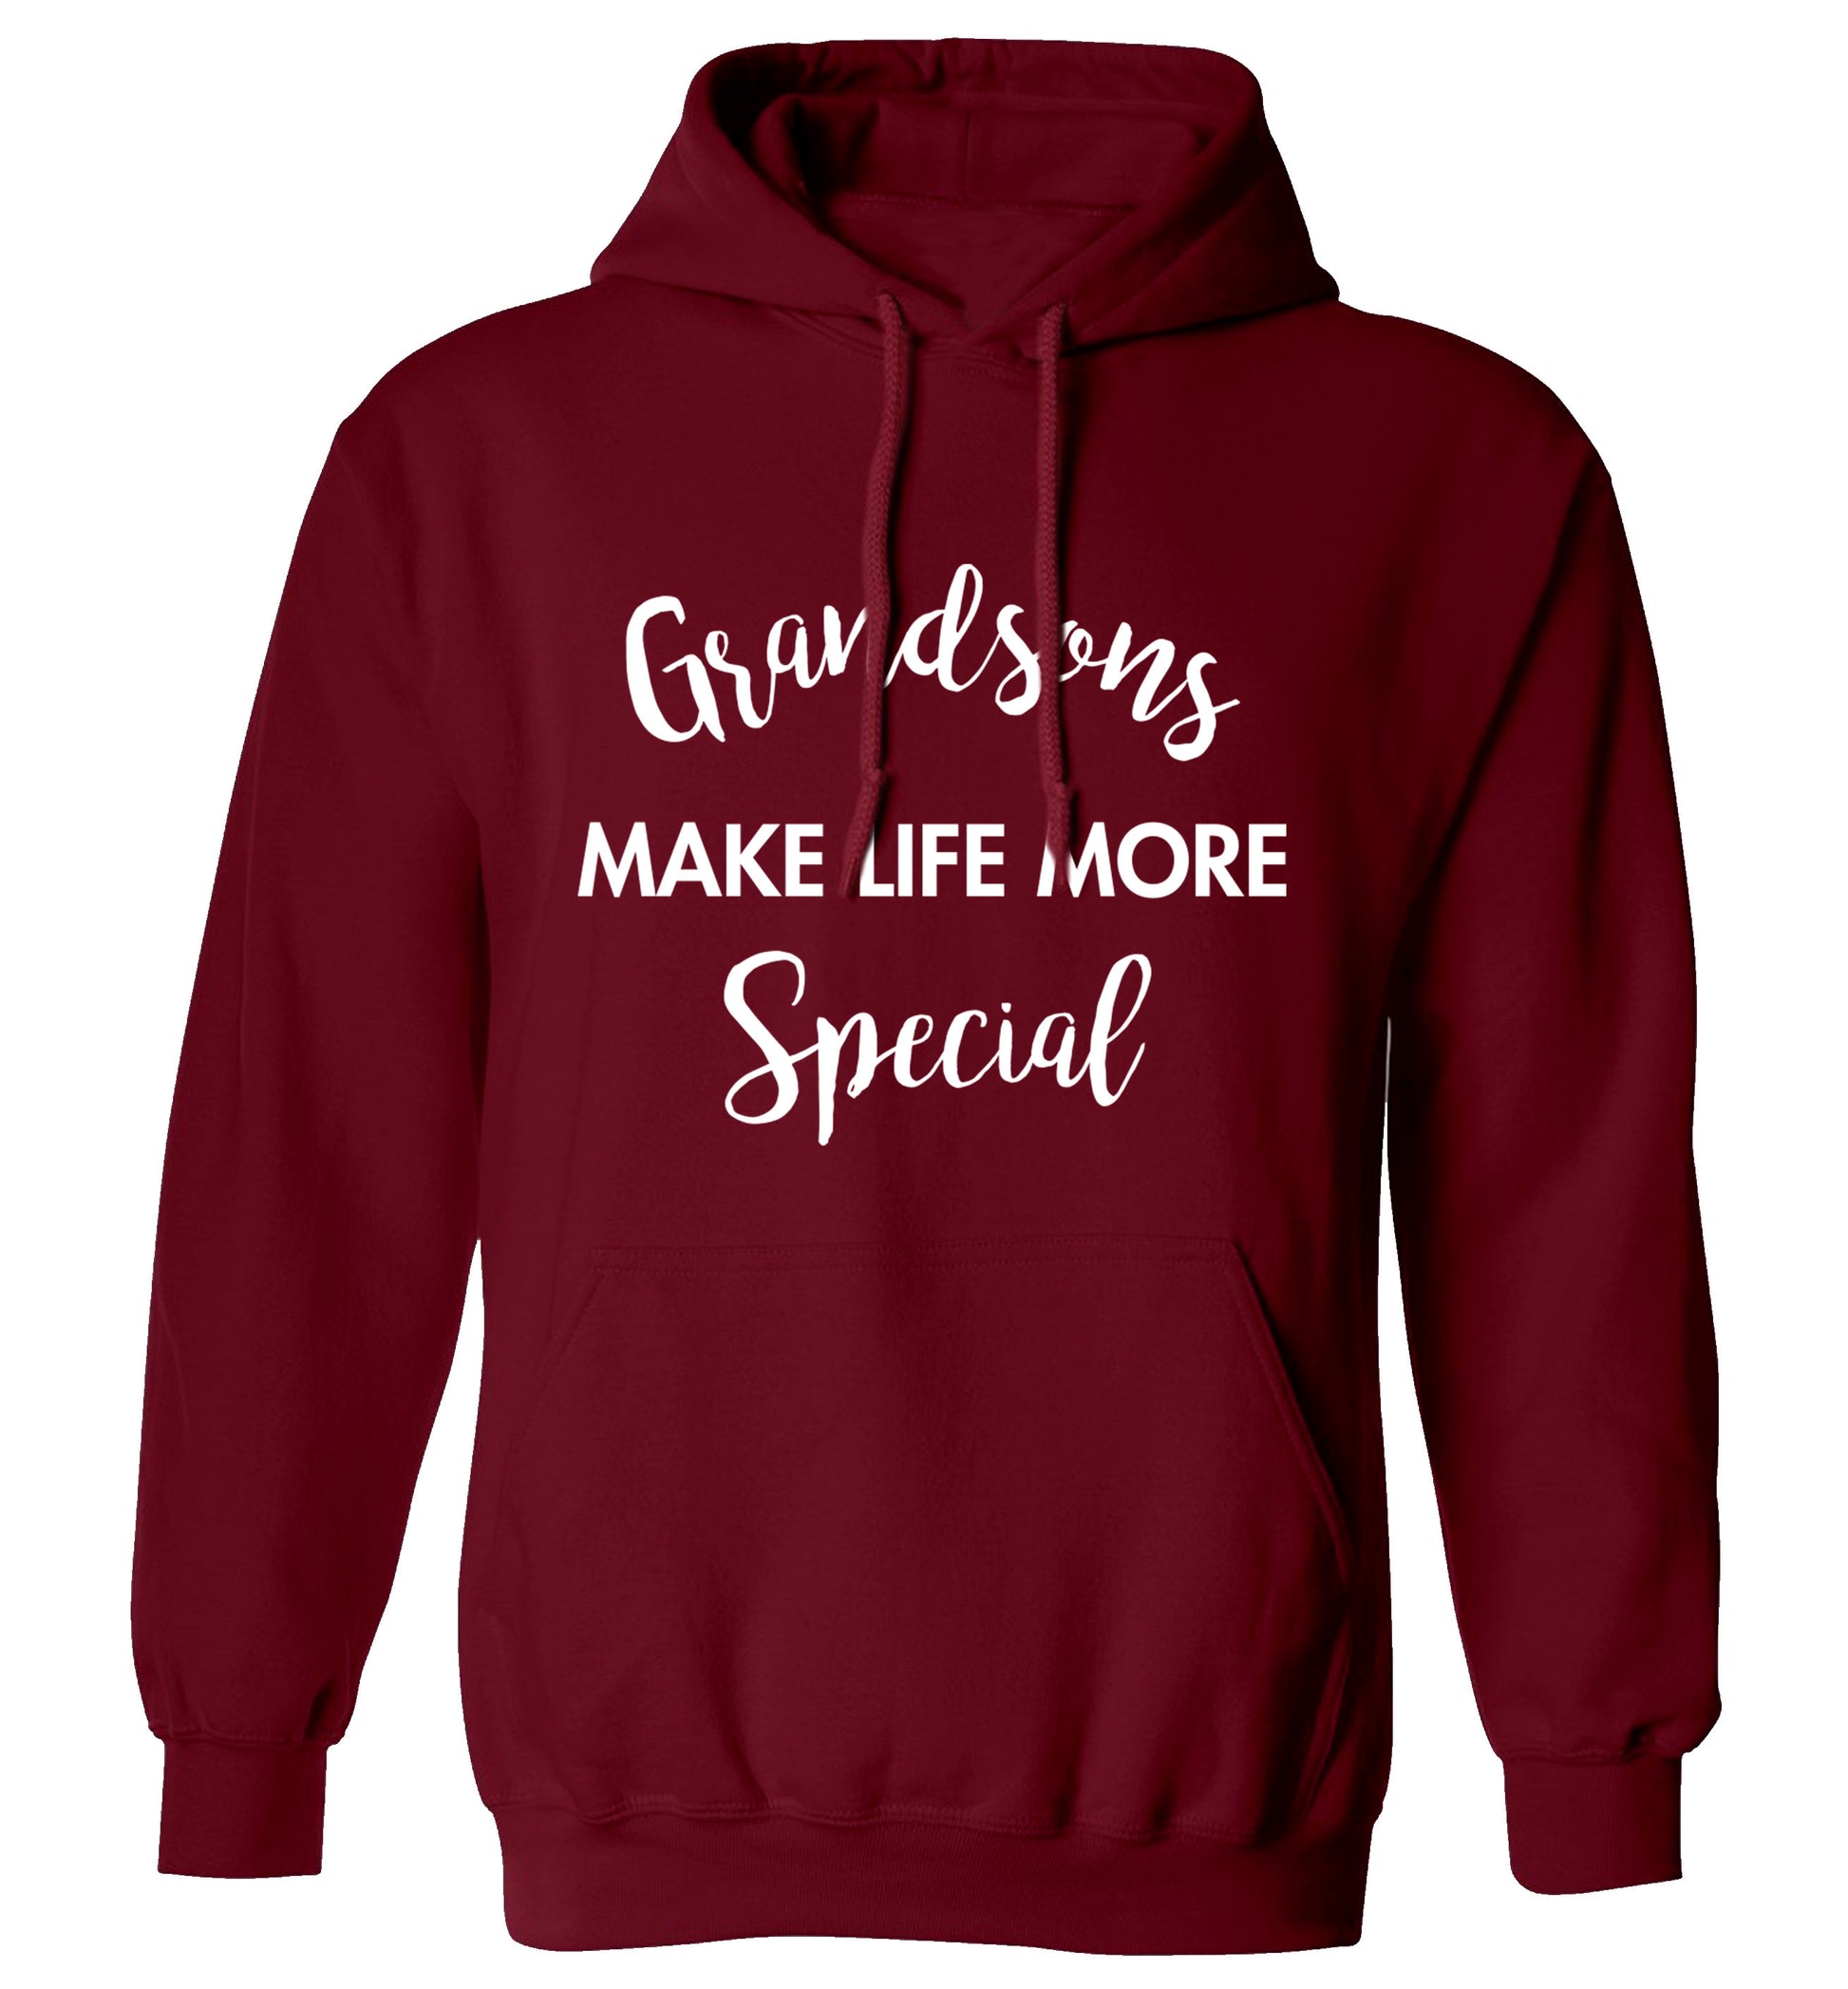 Grandsons make life more special adults unisex maroon hoodie 2XL